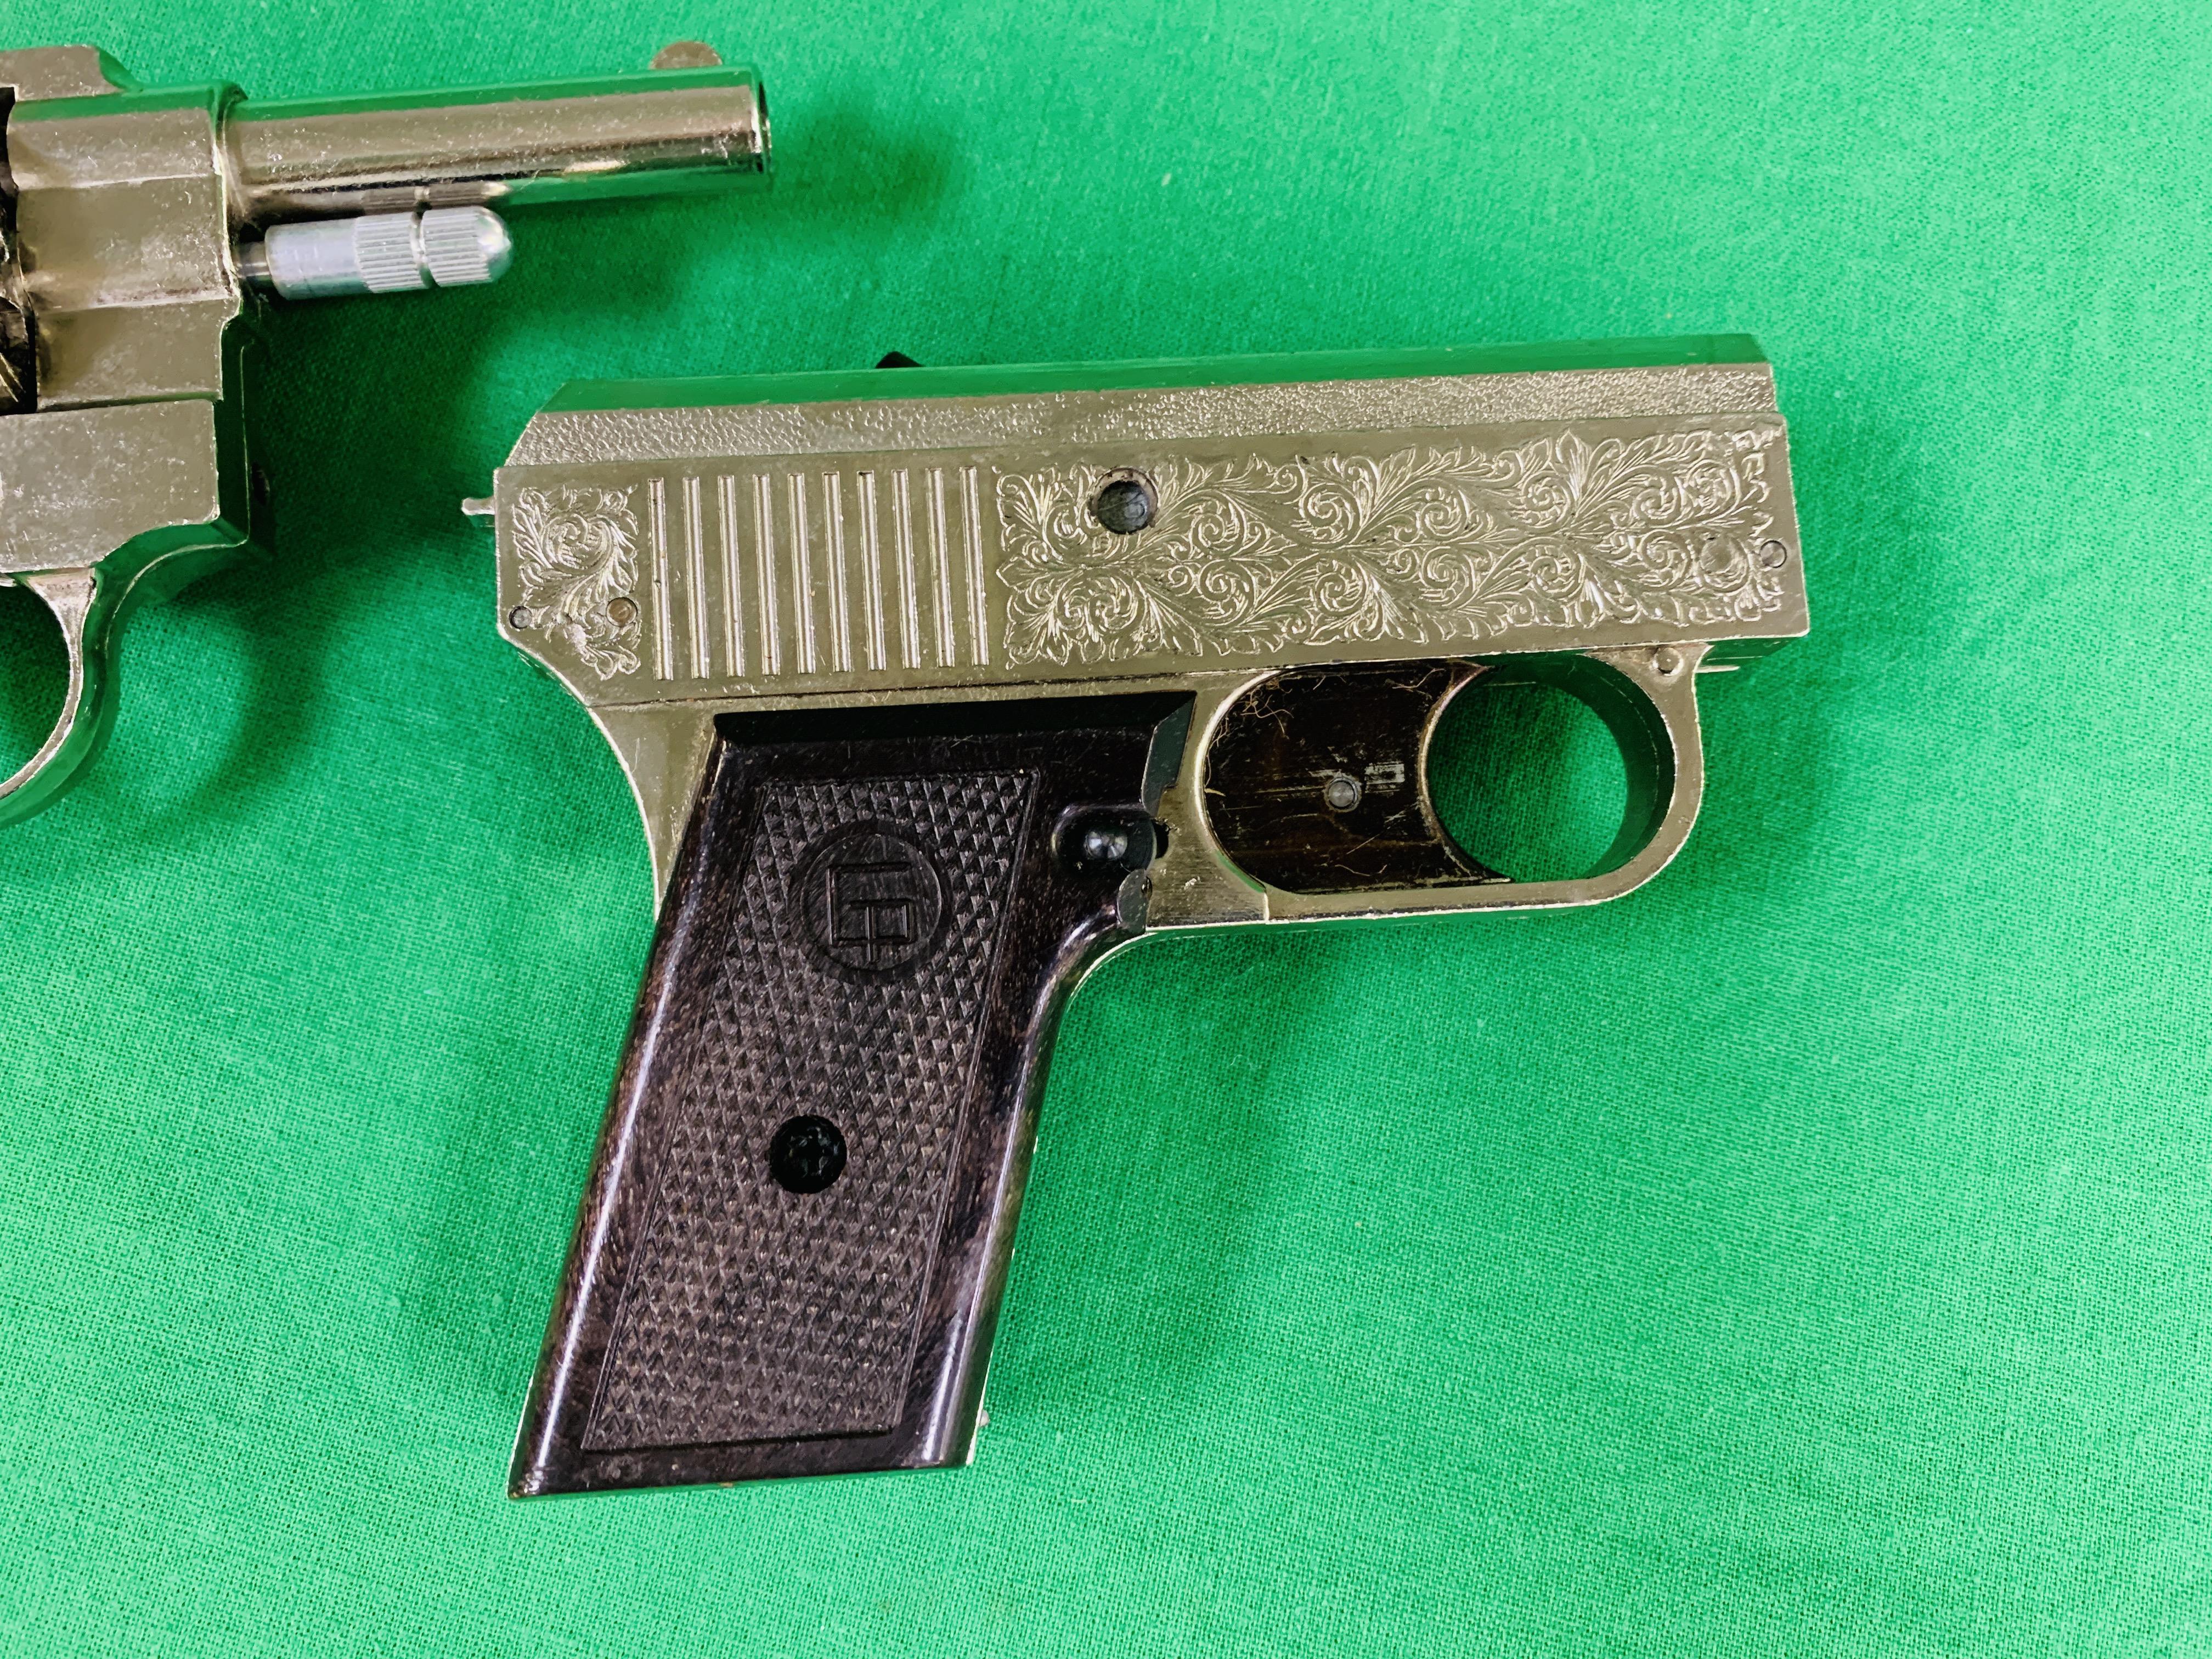 AN ITALIAN STARTING PISTOL ALONG WITH A FURTHER ITALIAN STARTING PISTOL - (ALL GUNS TO BE INSPECTED - Image 2 of 6